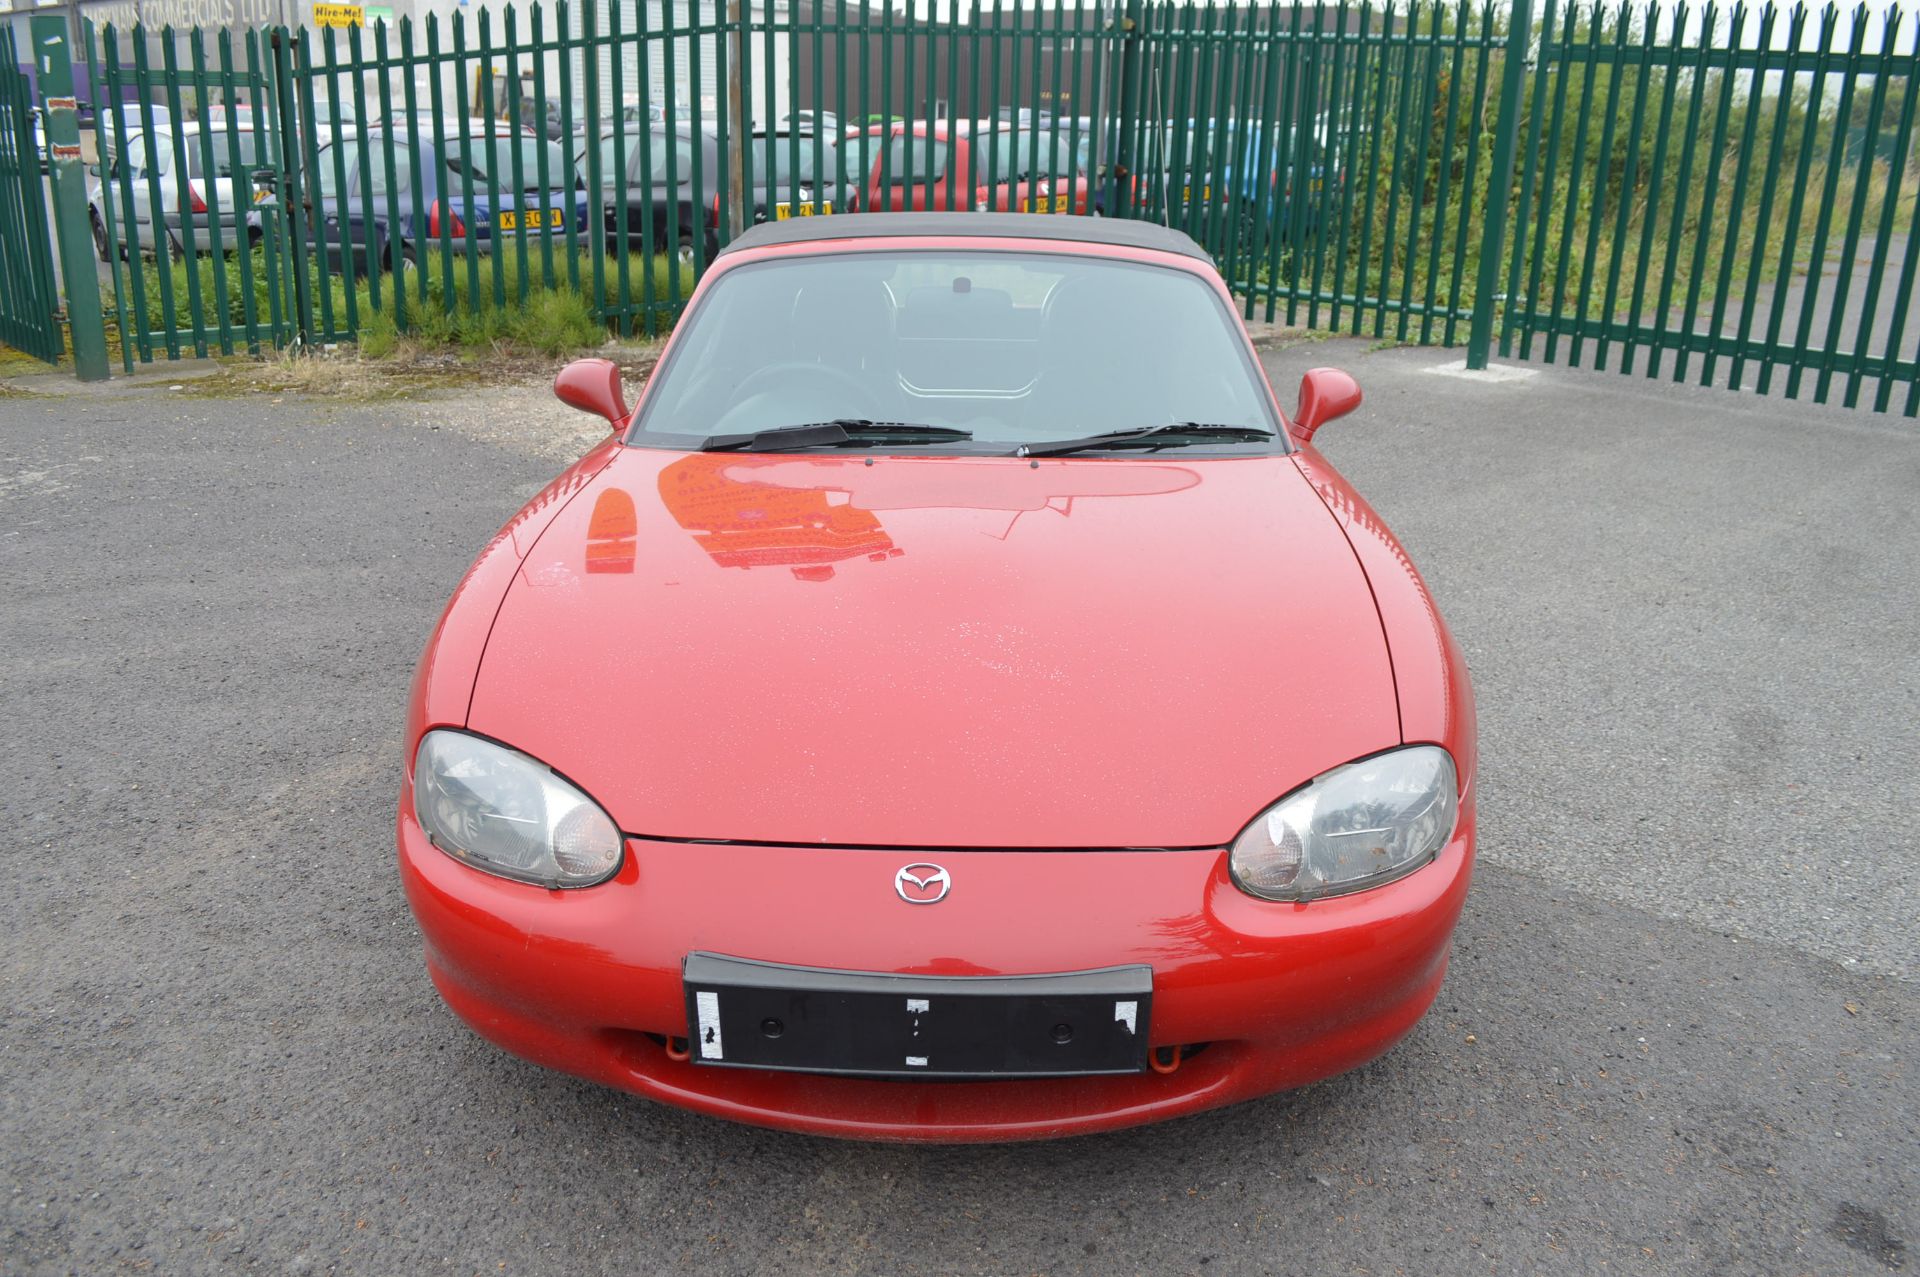 2001/Y REG MAZDA MX-5 1.81 CONVERTIBLE, UPRATED SUSPENSION, BRAKES, INDUCTION ETC - Image 2 of 17